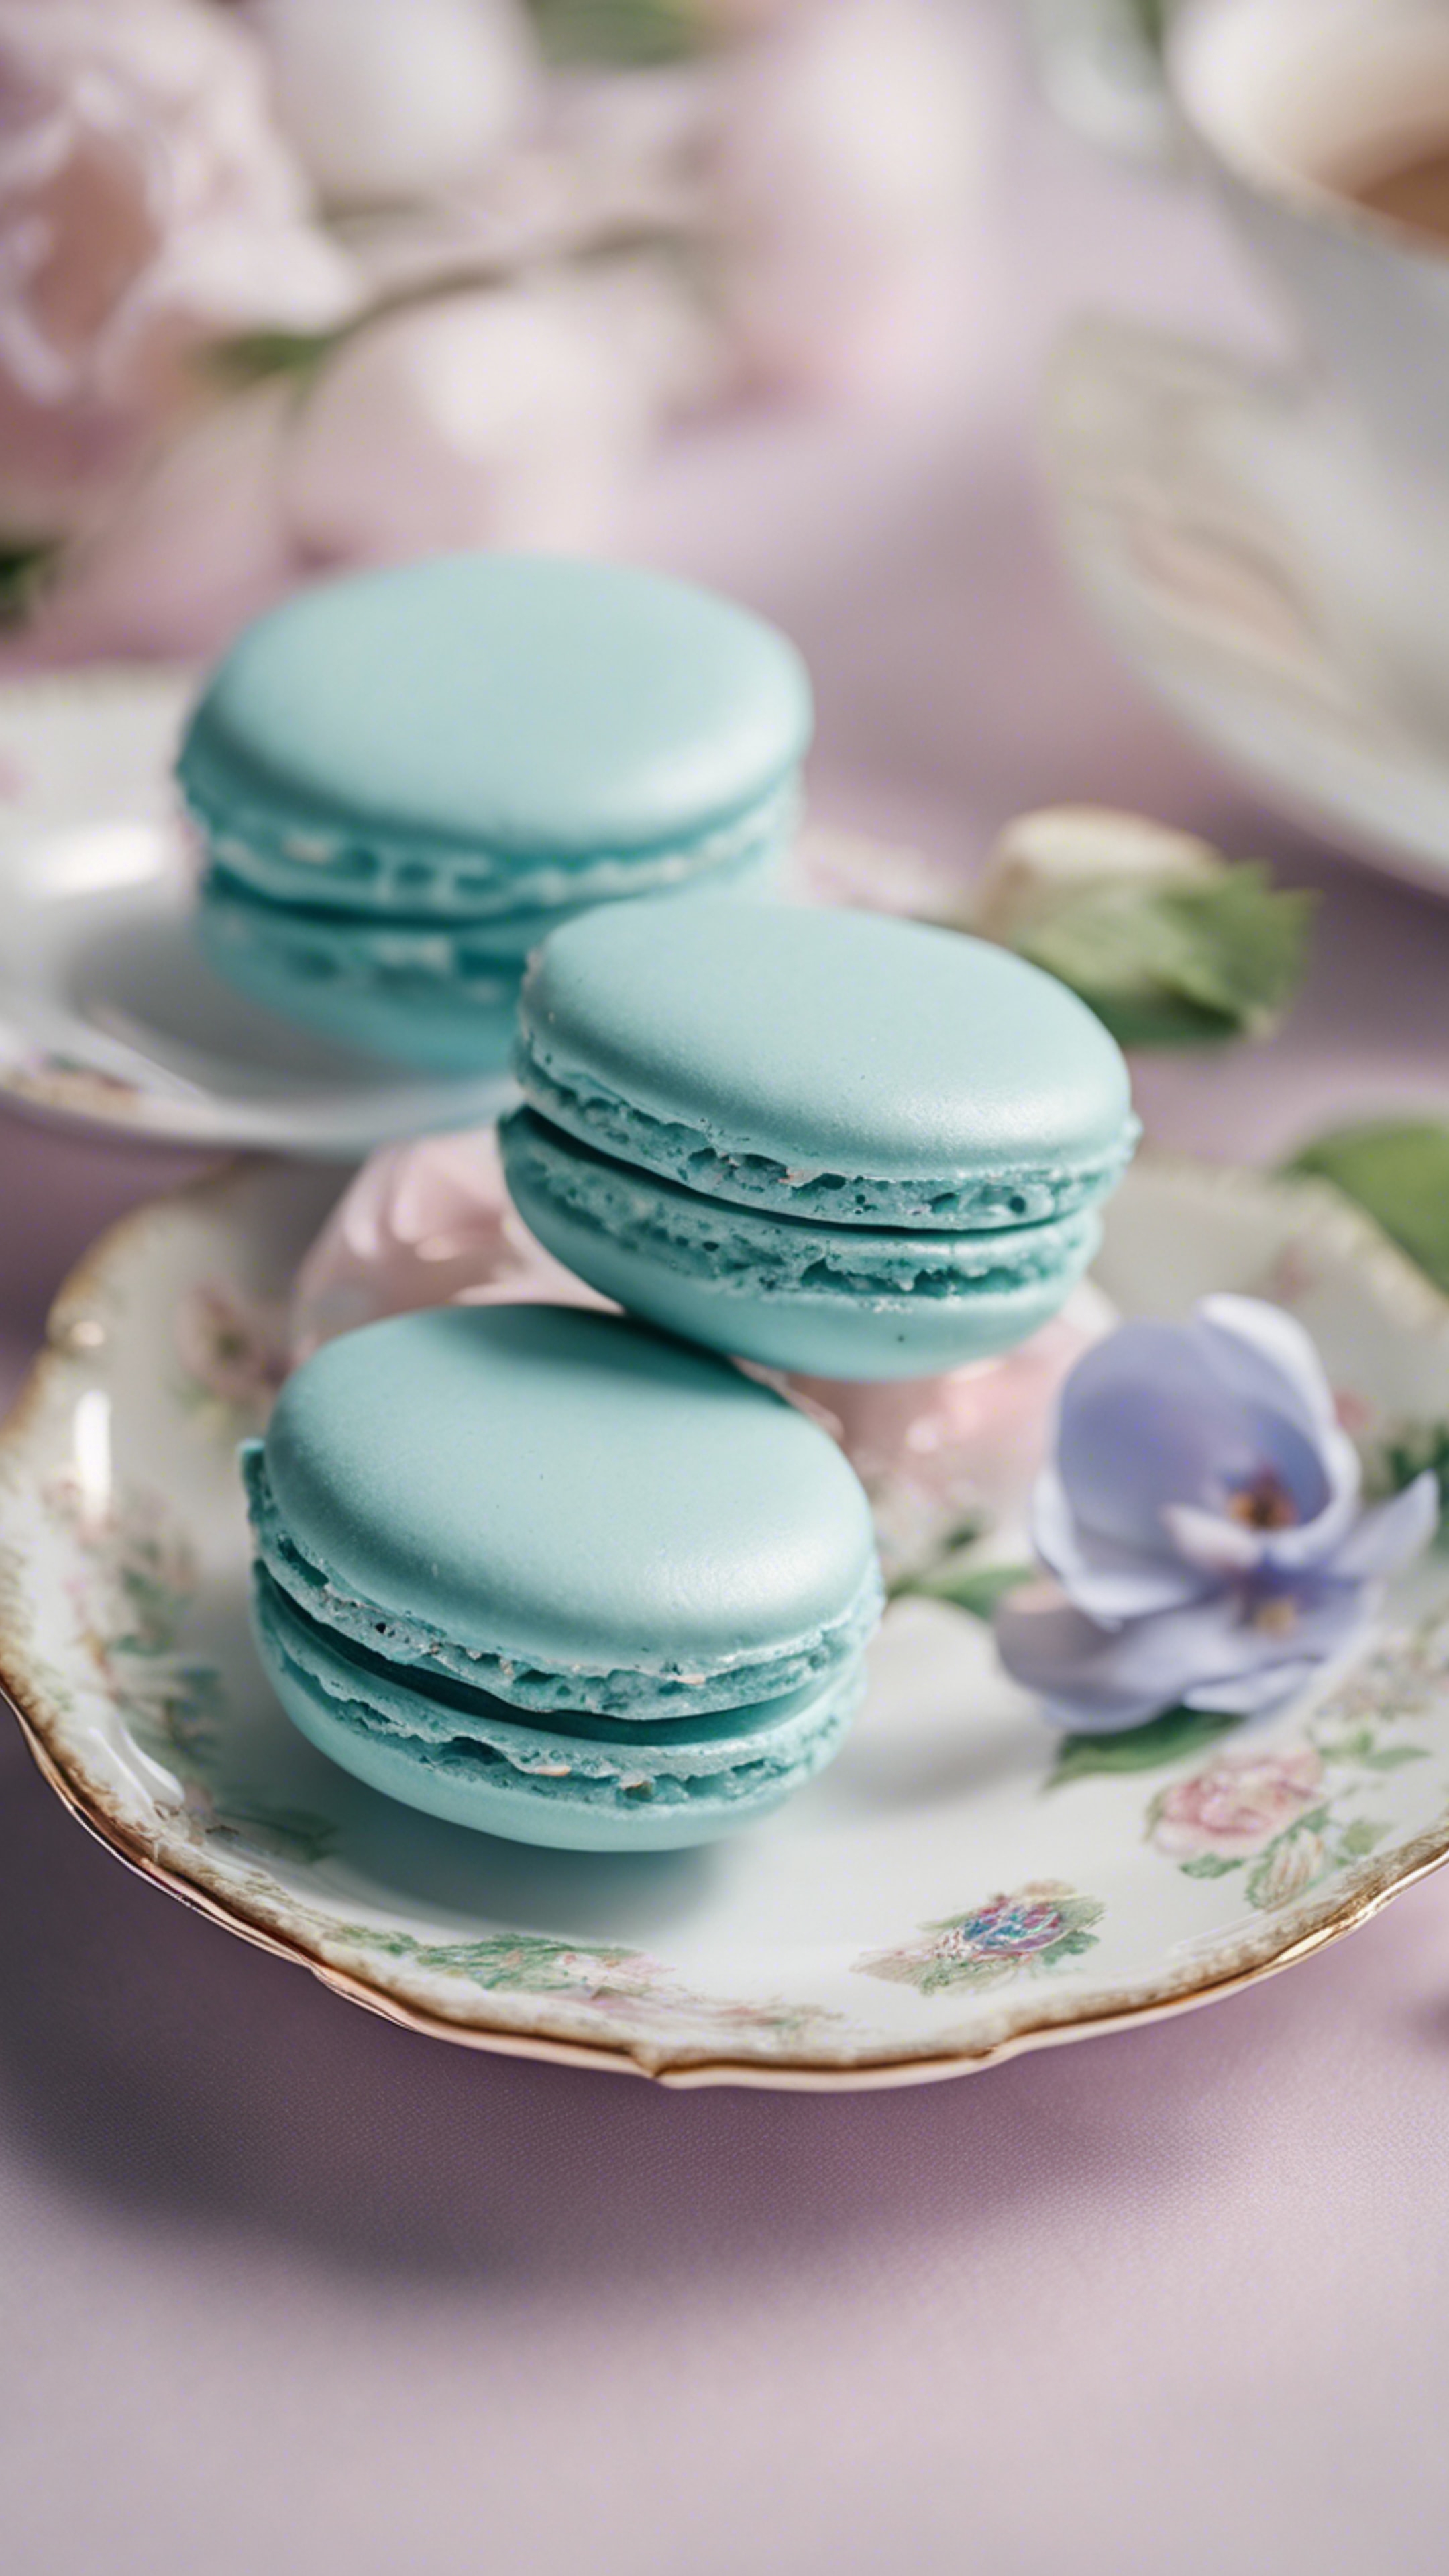 A pair of pastel blue French macarons on a dainty floral china plate.壁紙[cc240826fa4e4ee284e3]